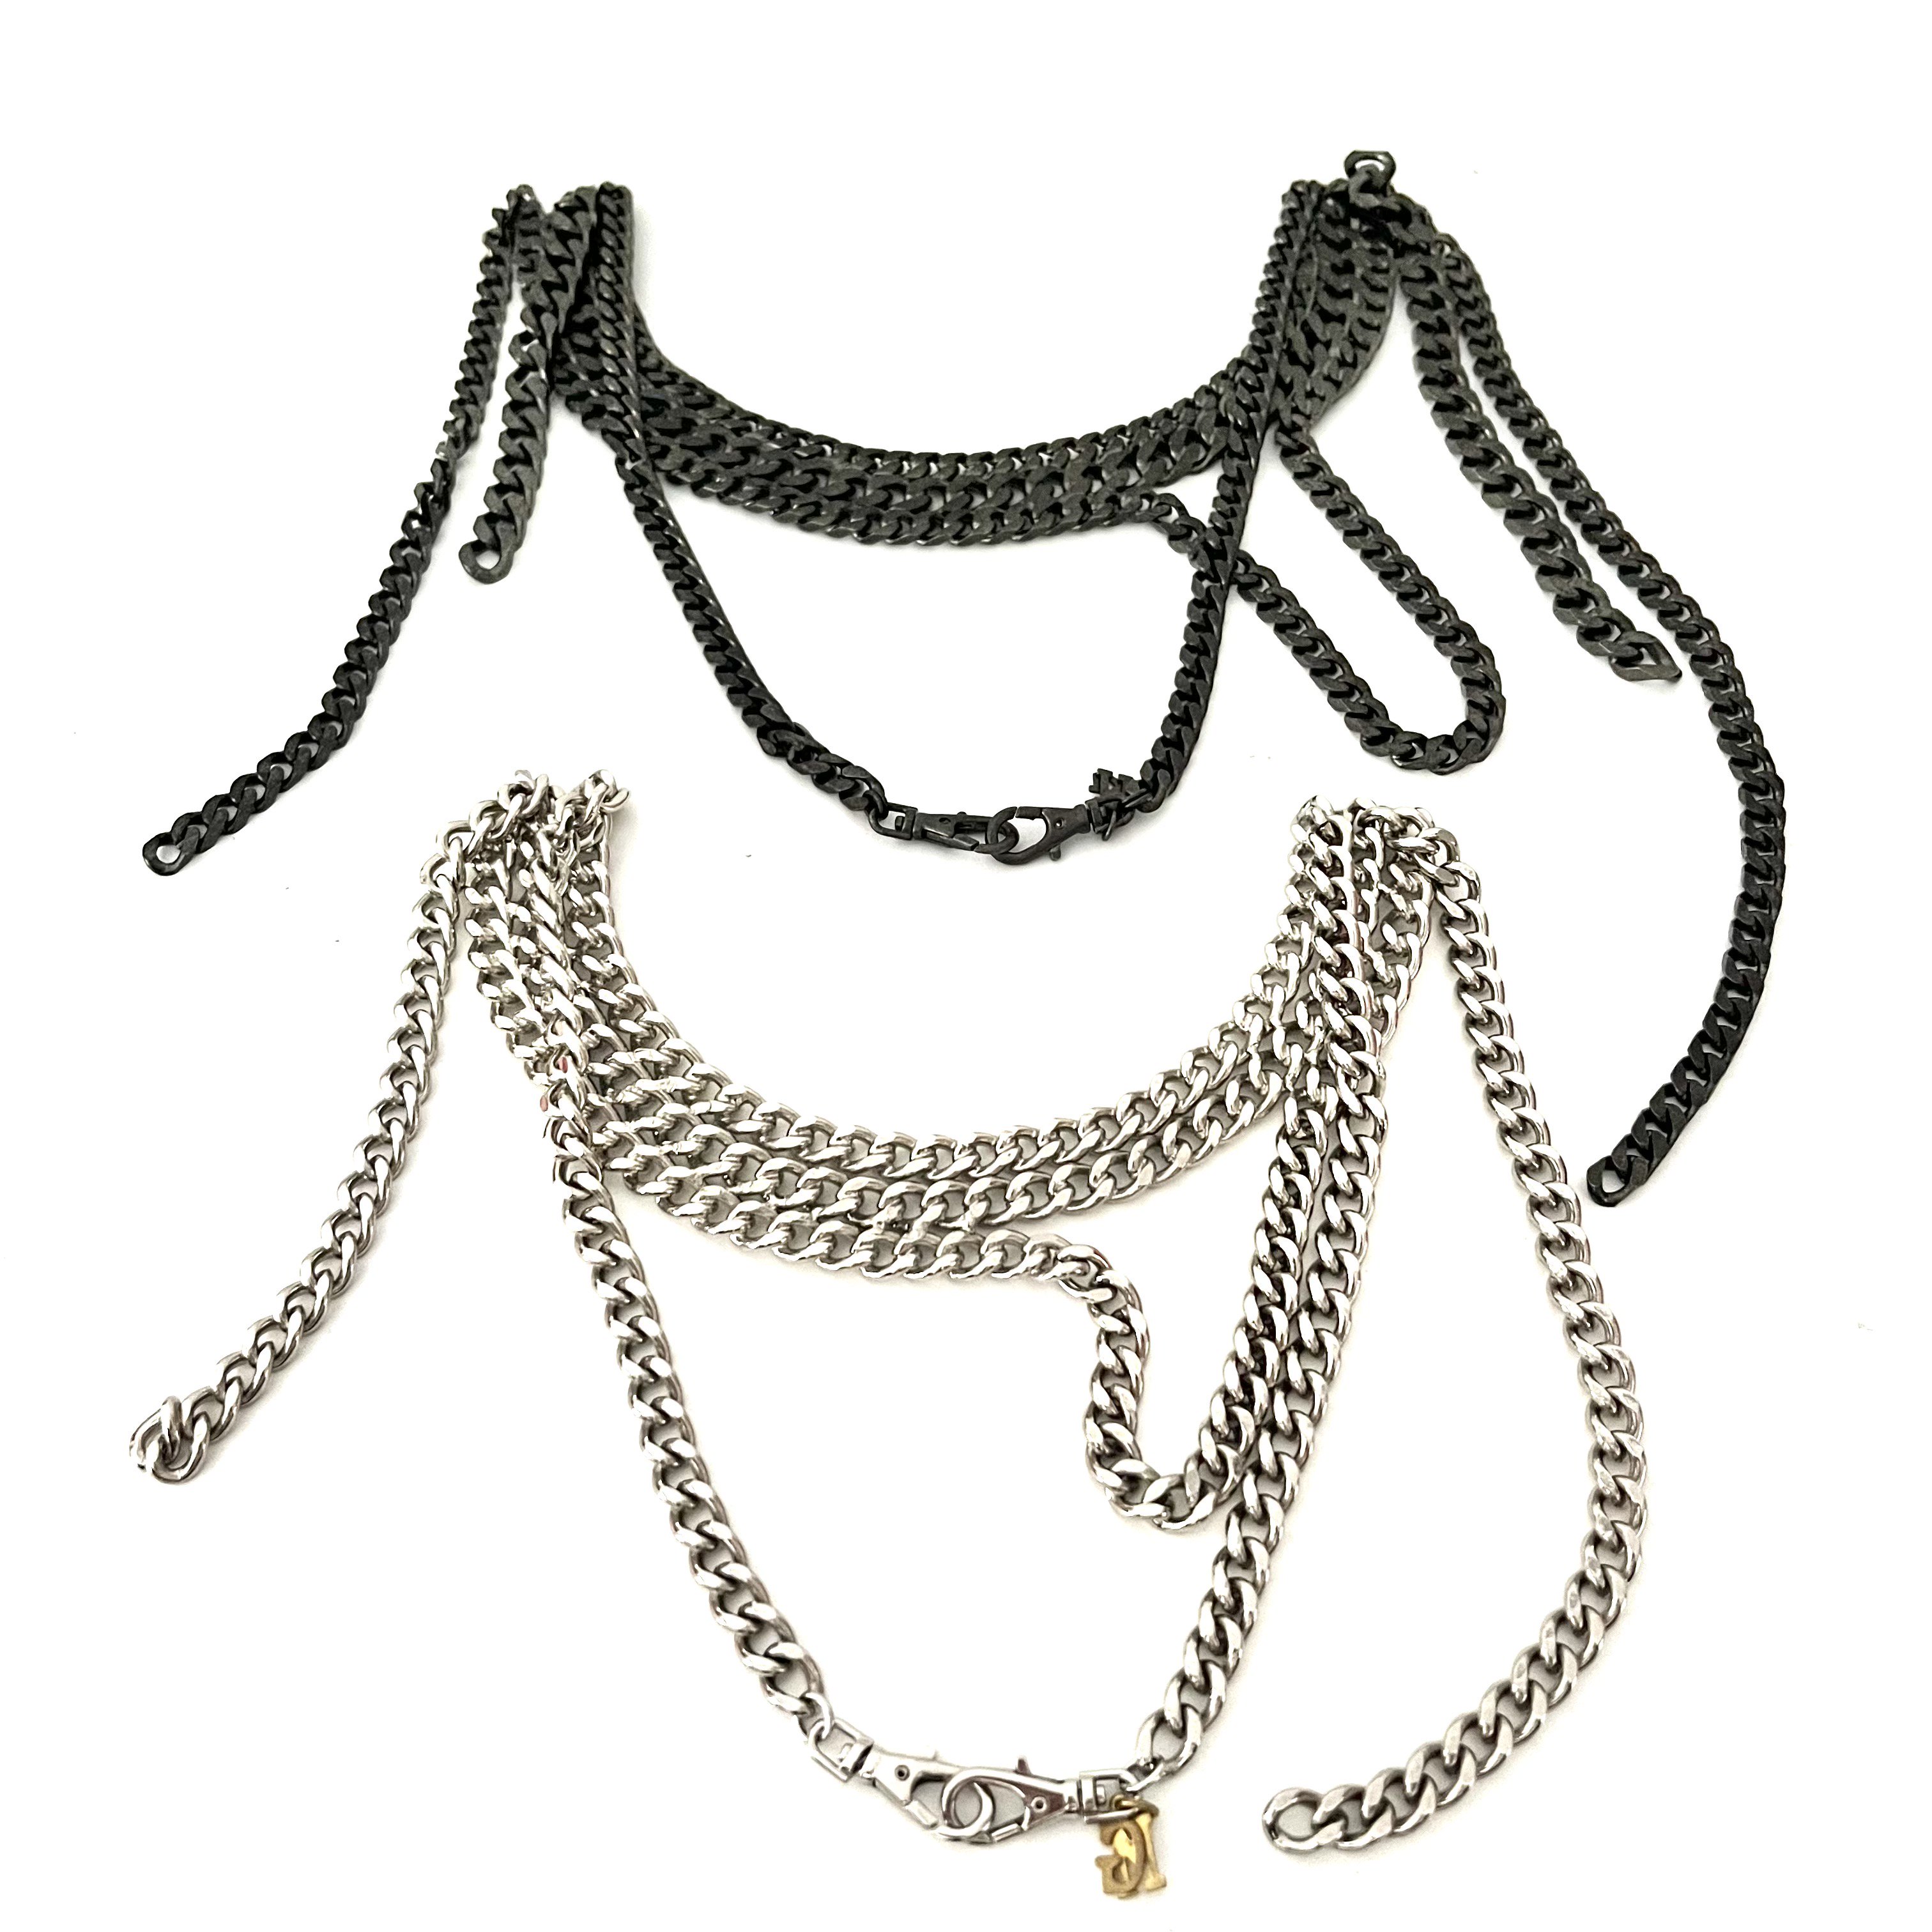 【Malcolm Guerre】chain necklace - KIDILL ROOM ONLINE SHOP